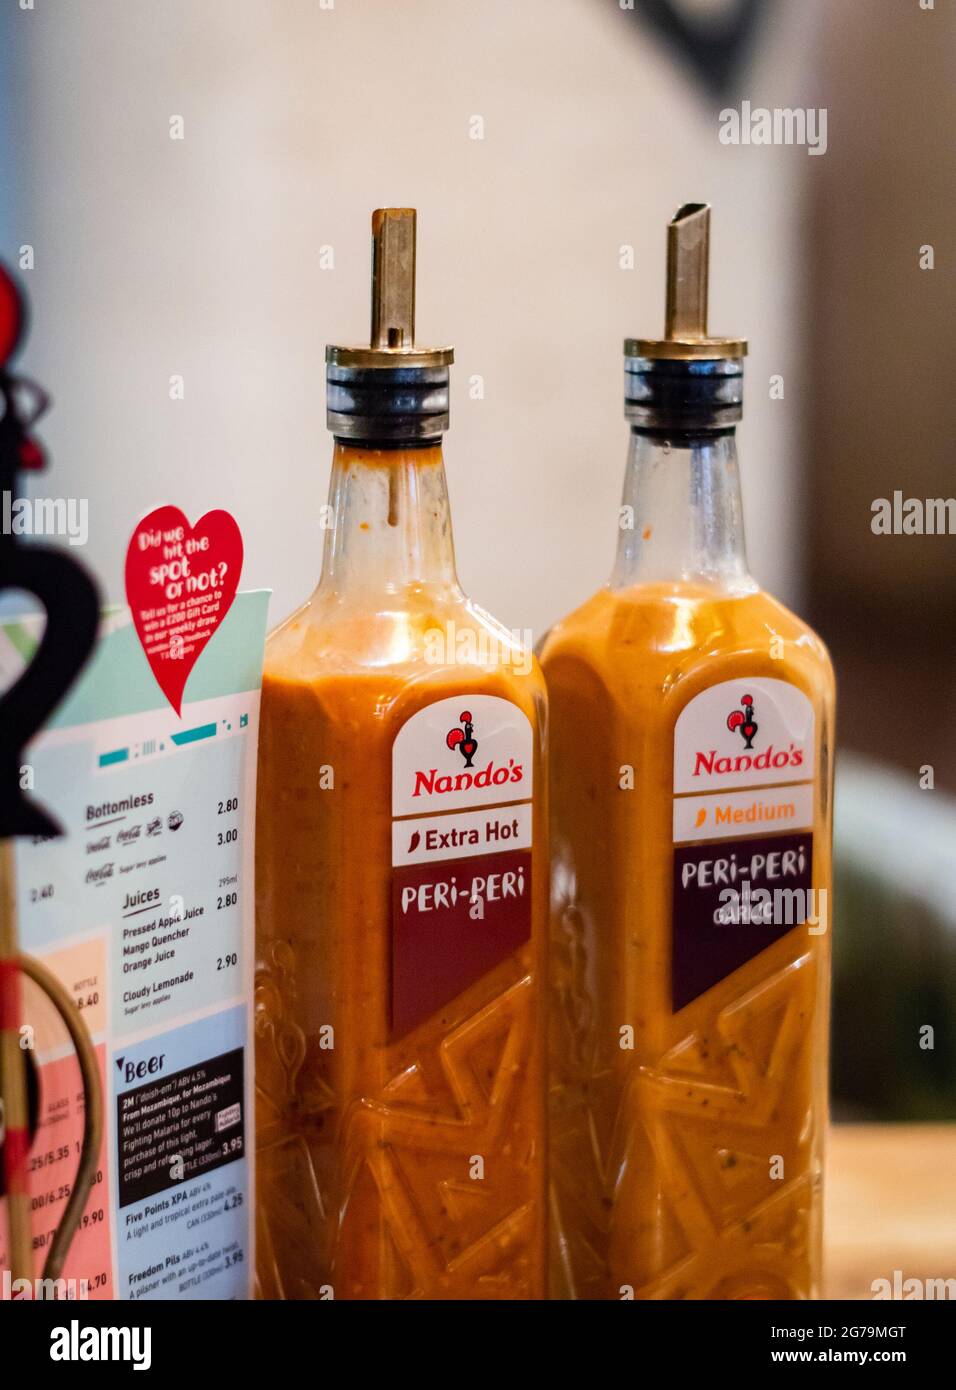 Nandos Peri Peri Sauce Bottle High Resolution Stock Photography And Images Alamy